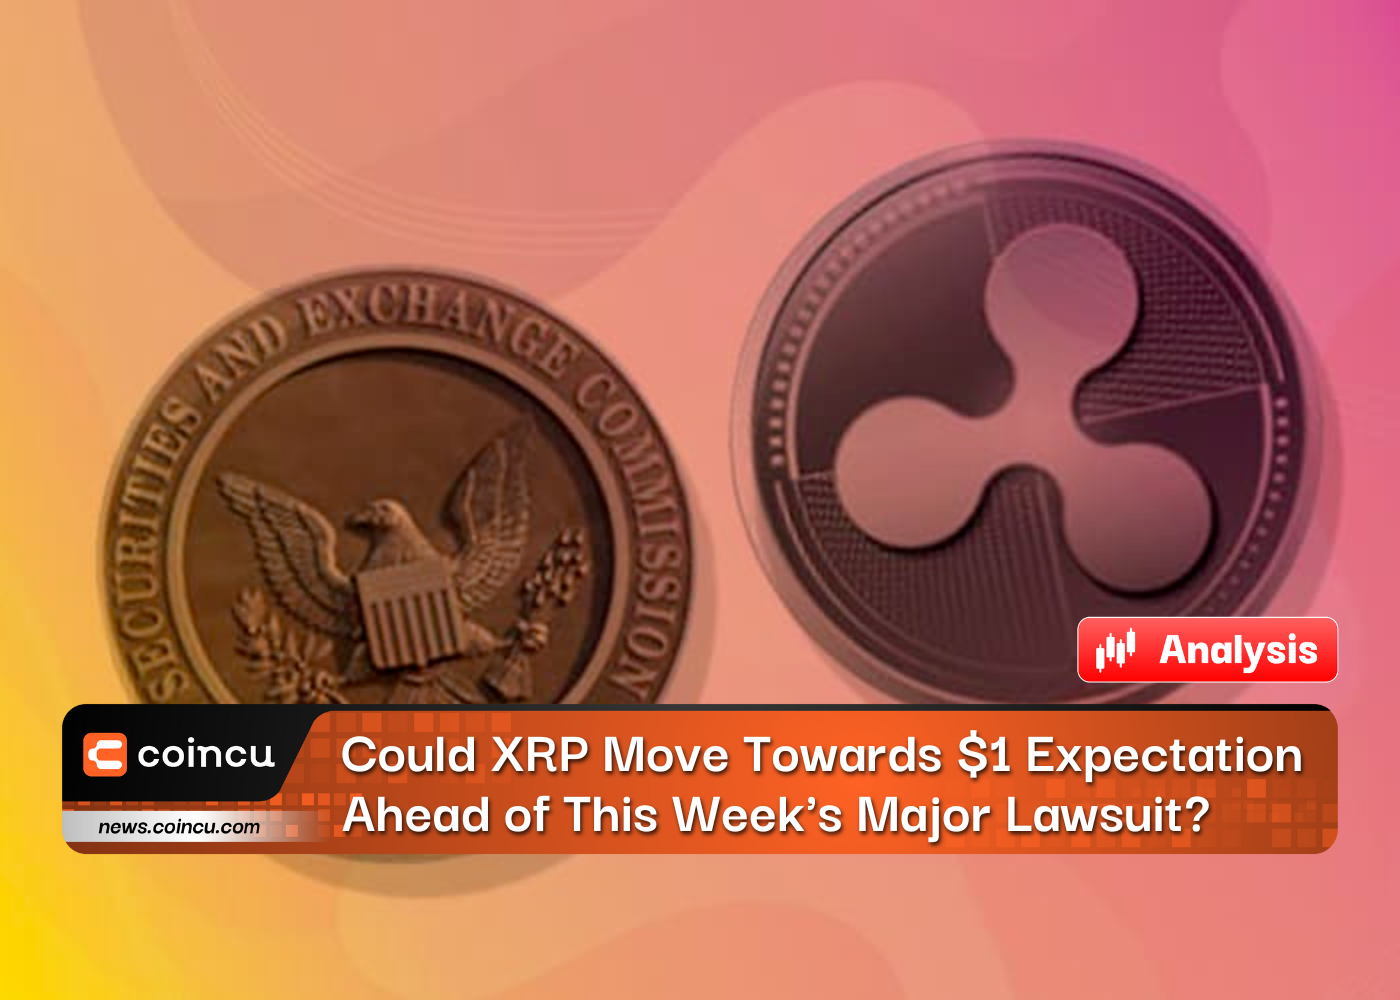 Could XRP Move Towards $1 Expectation Ahead of This Week's Major Lawsuit?